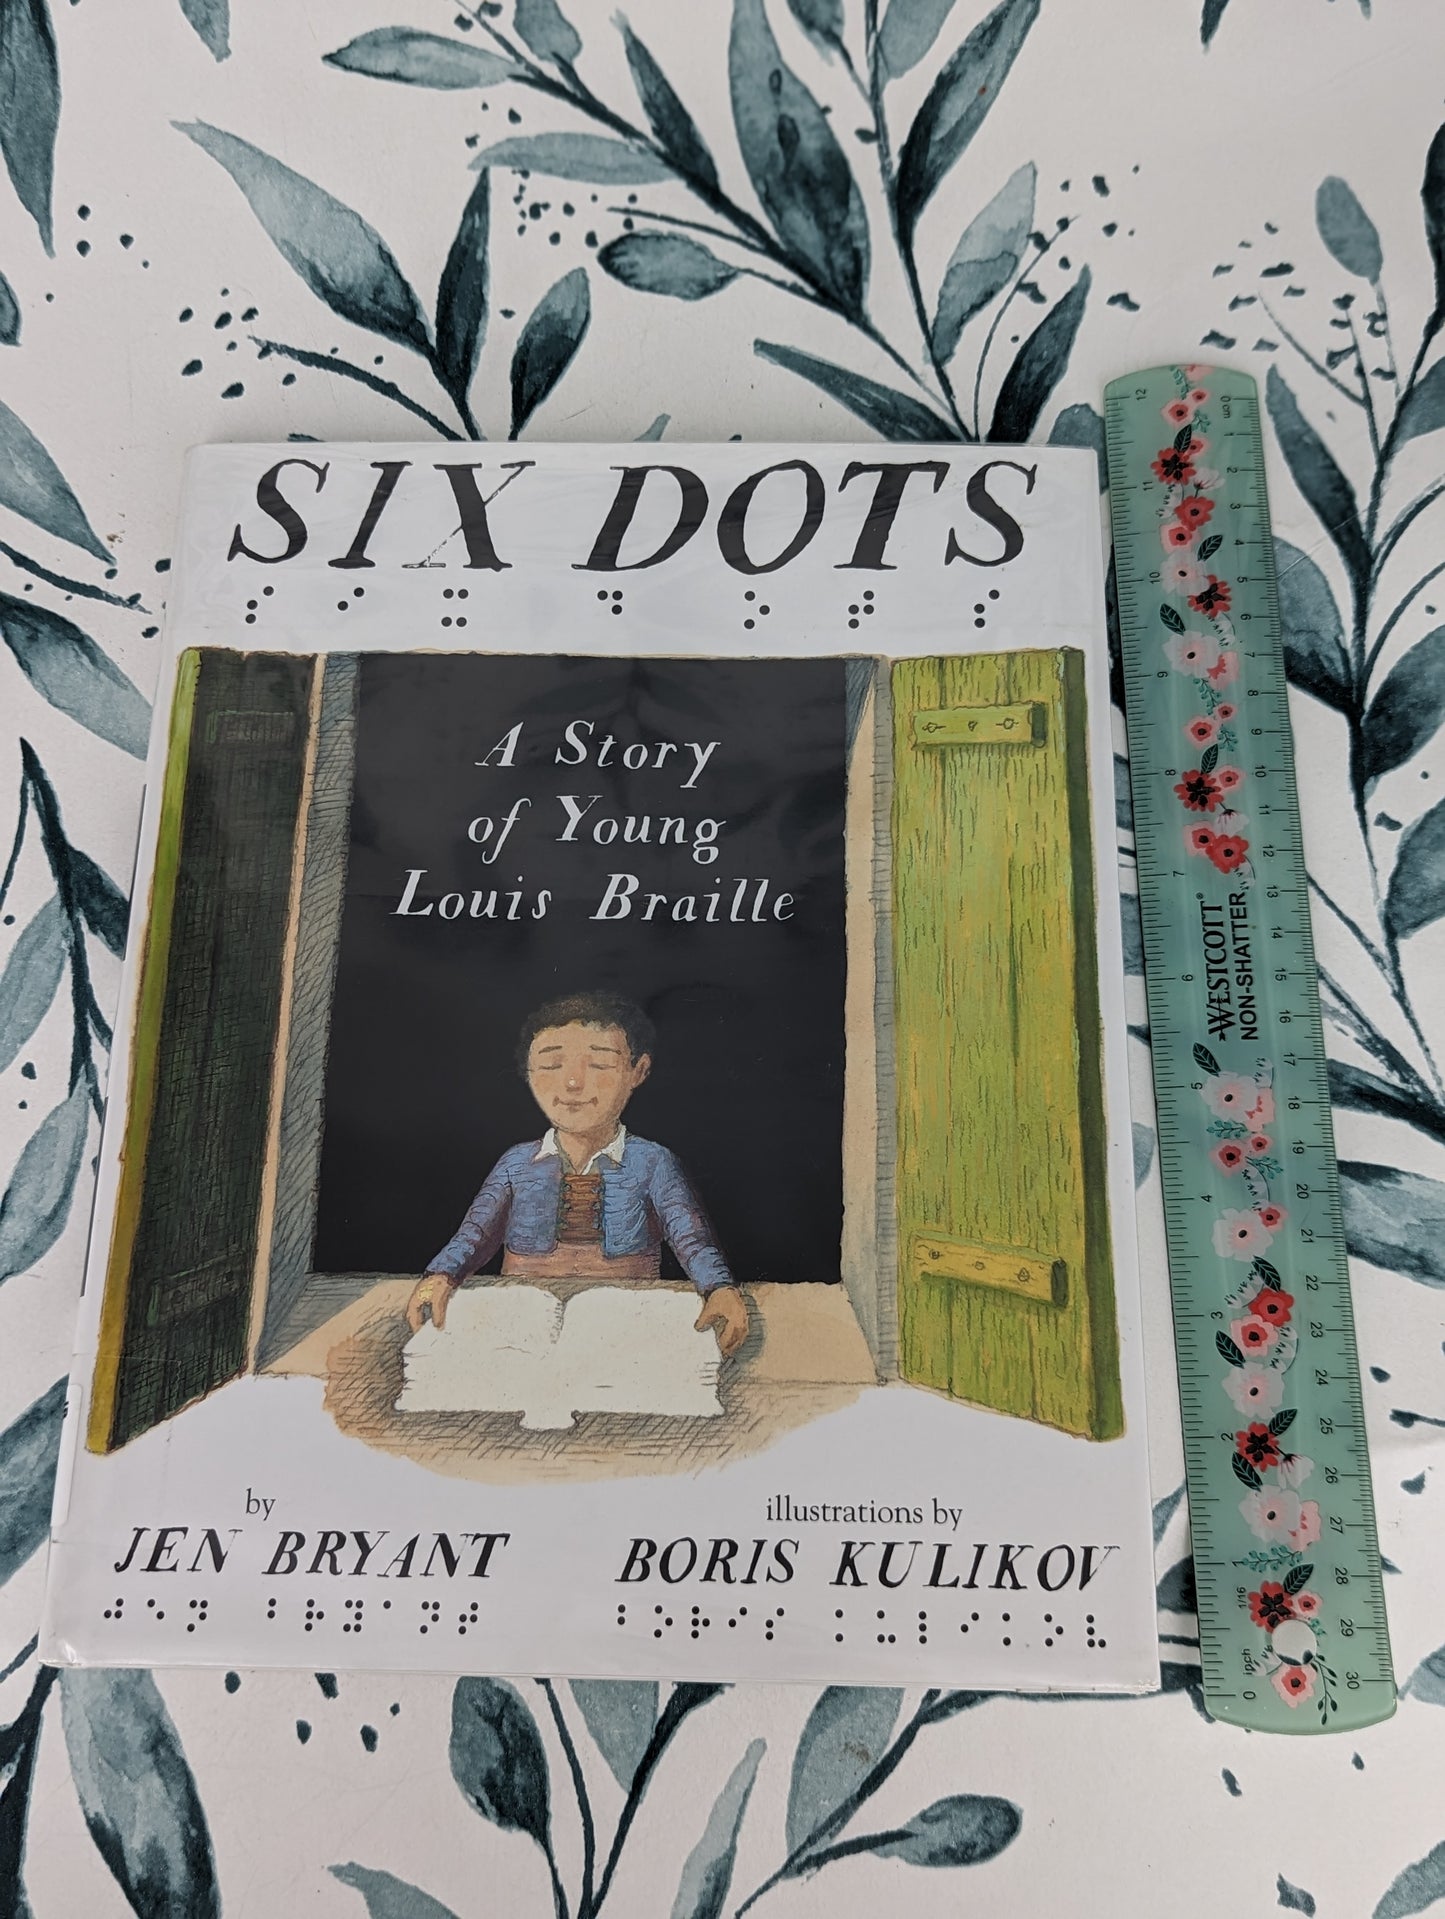 Six Dots: The Story of Young Louis Braille